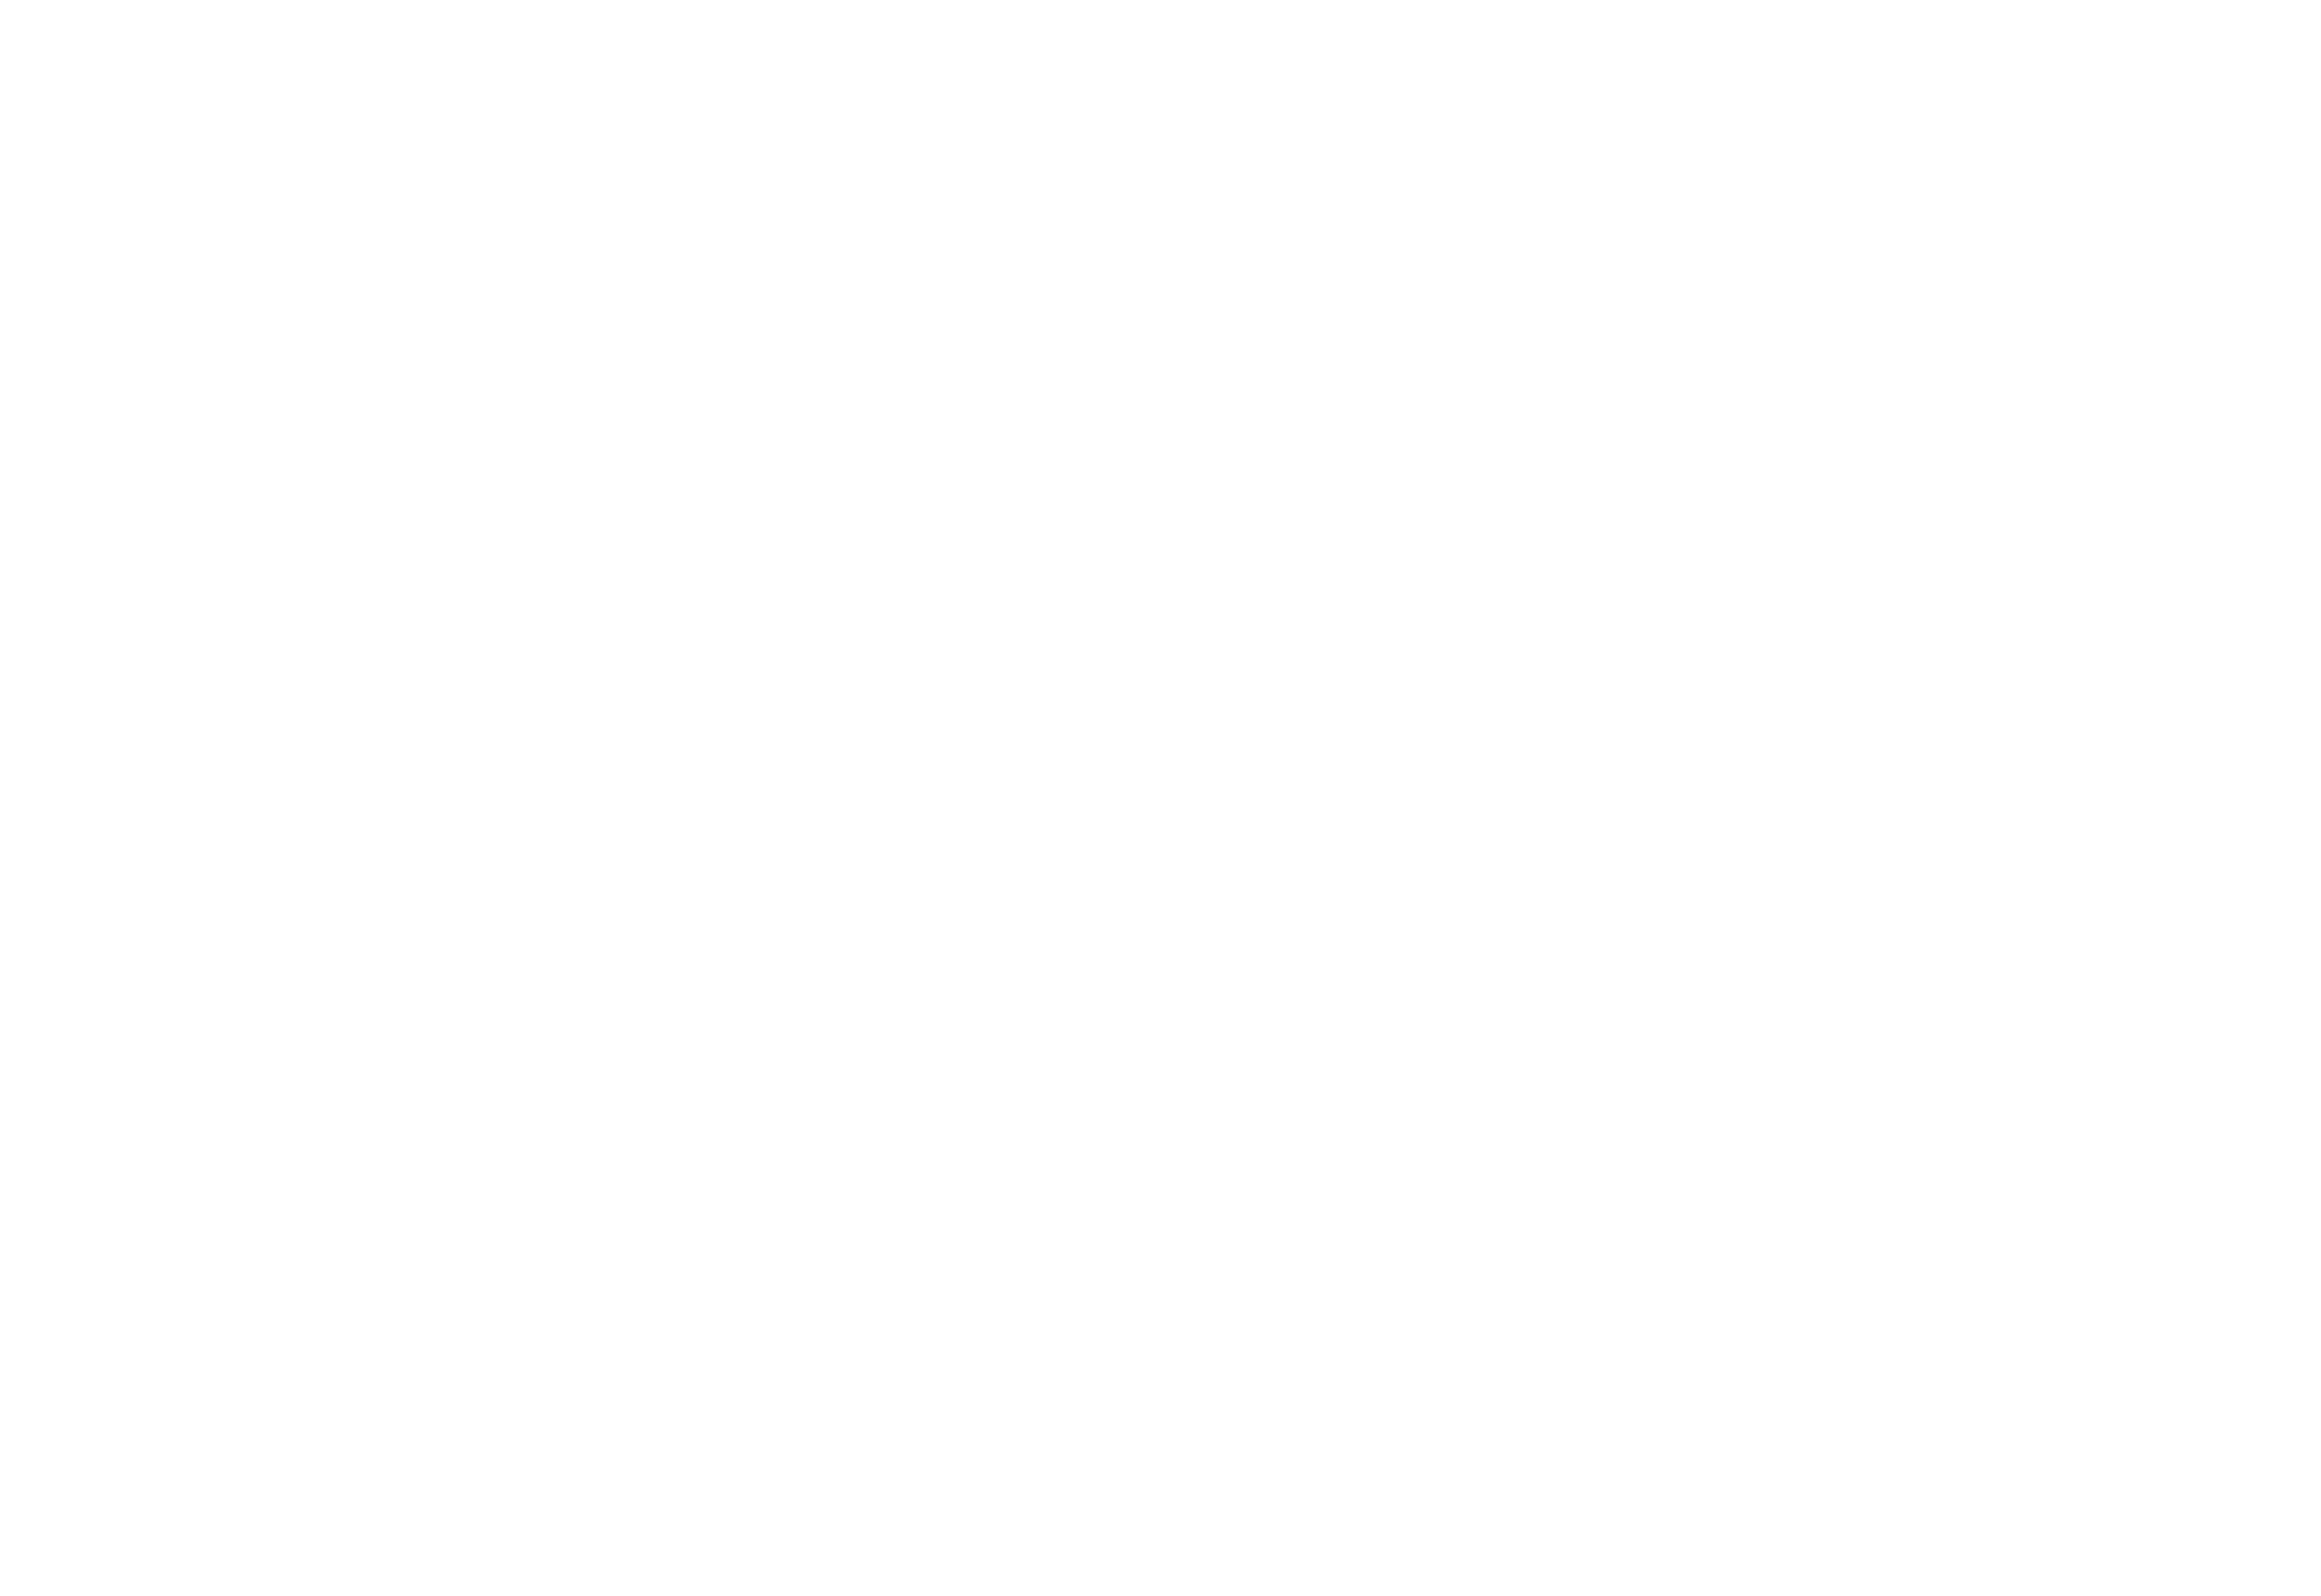 Bonafide Basketball Articles and Podcasts